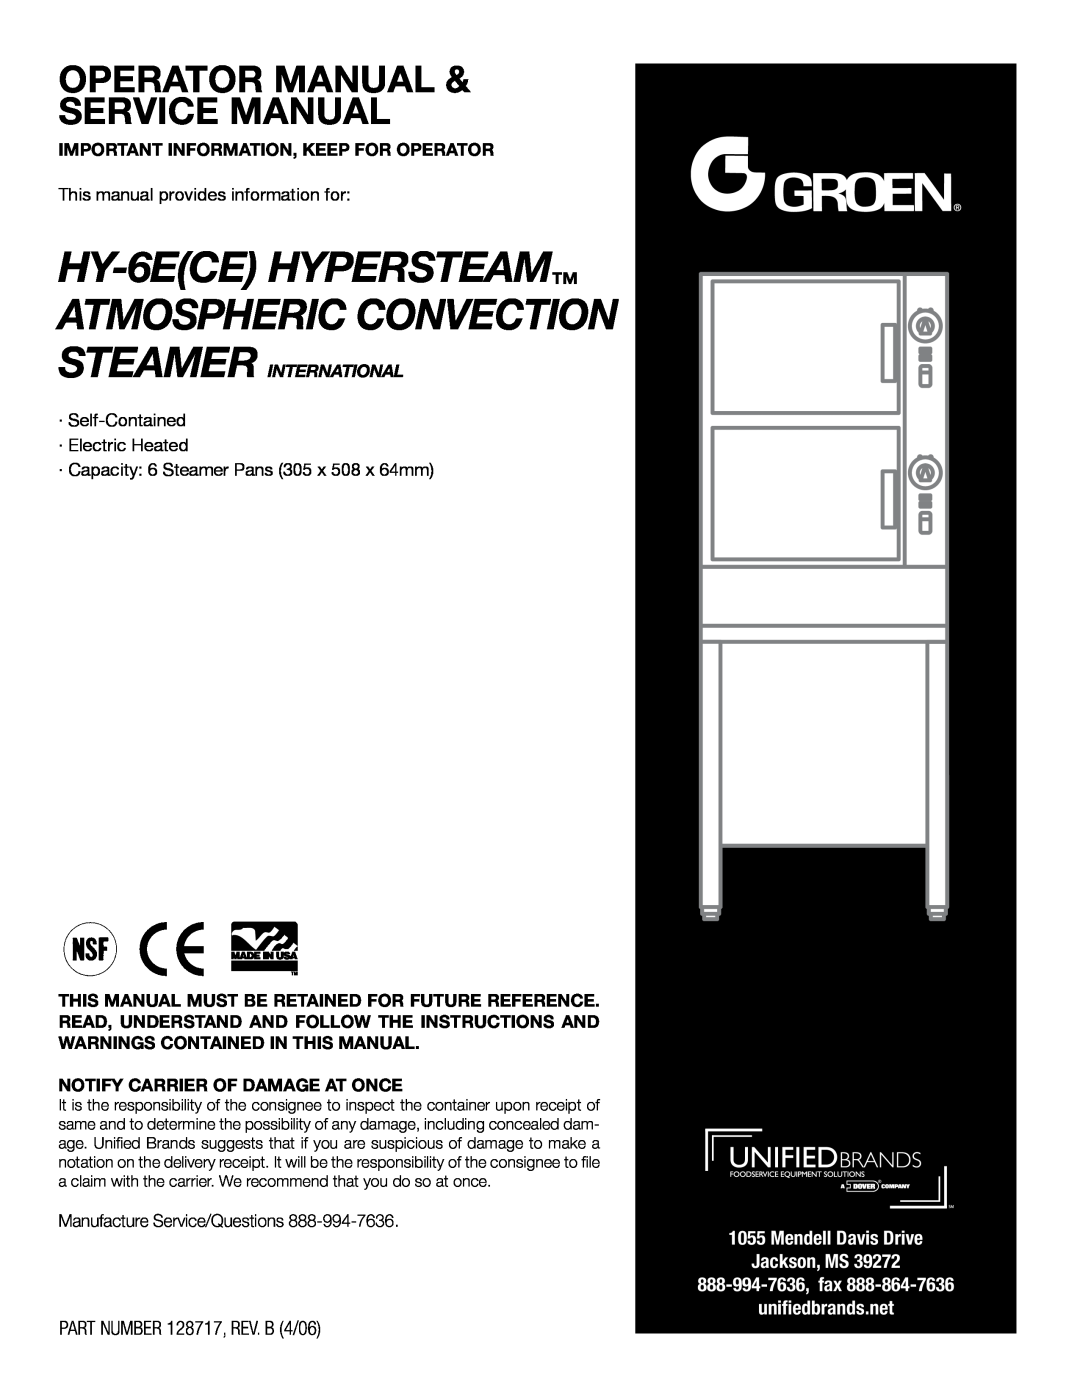 Unified Brands HY-6E(CE) service manual HY-6ECEHYPERSTEAM ATMOSPHERIC CONVECTION, Operator Manual & Service Manual 